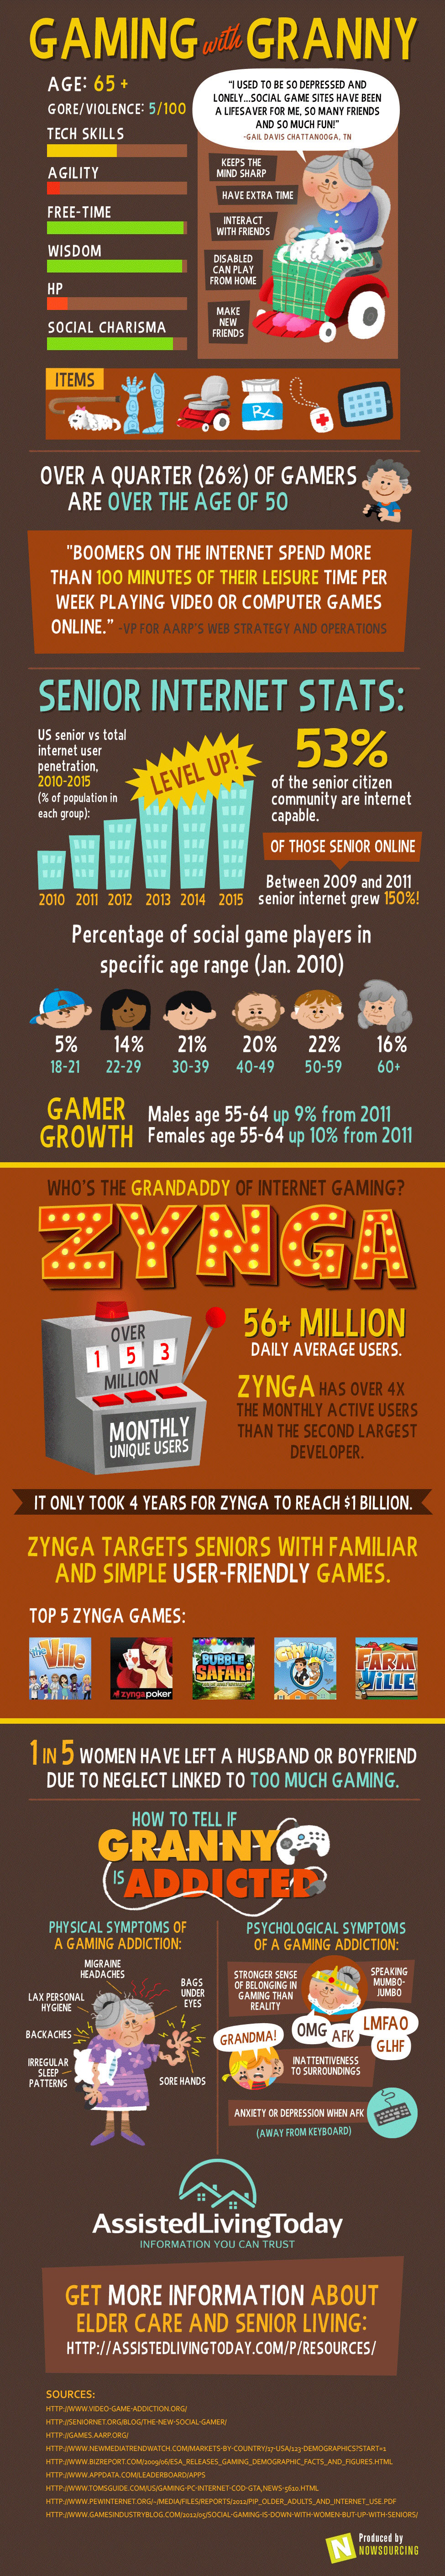 Gaming with Granny Infographic